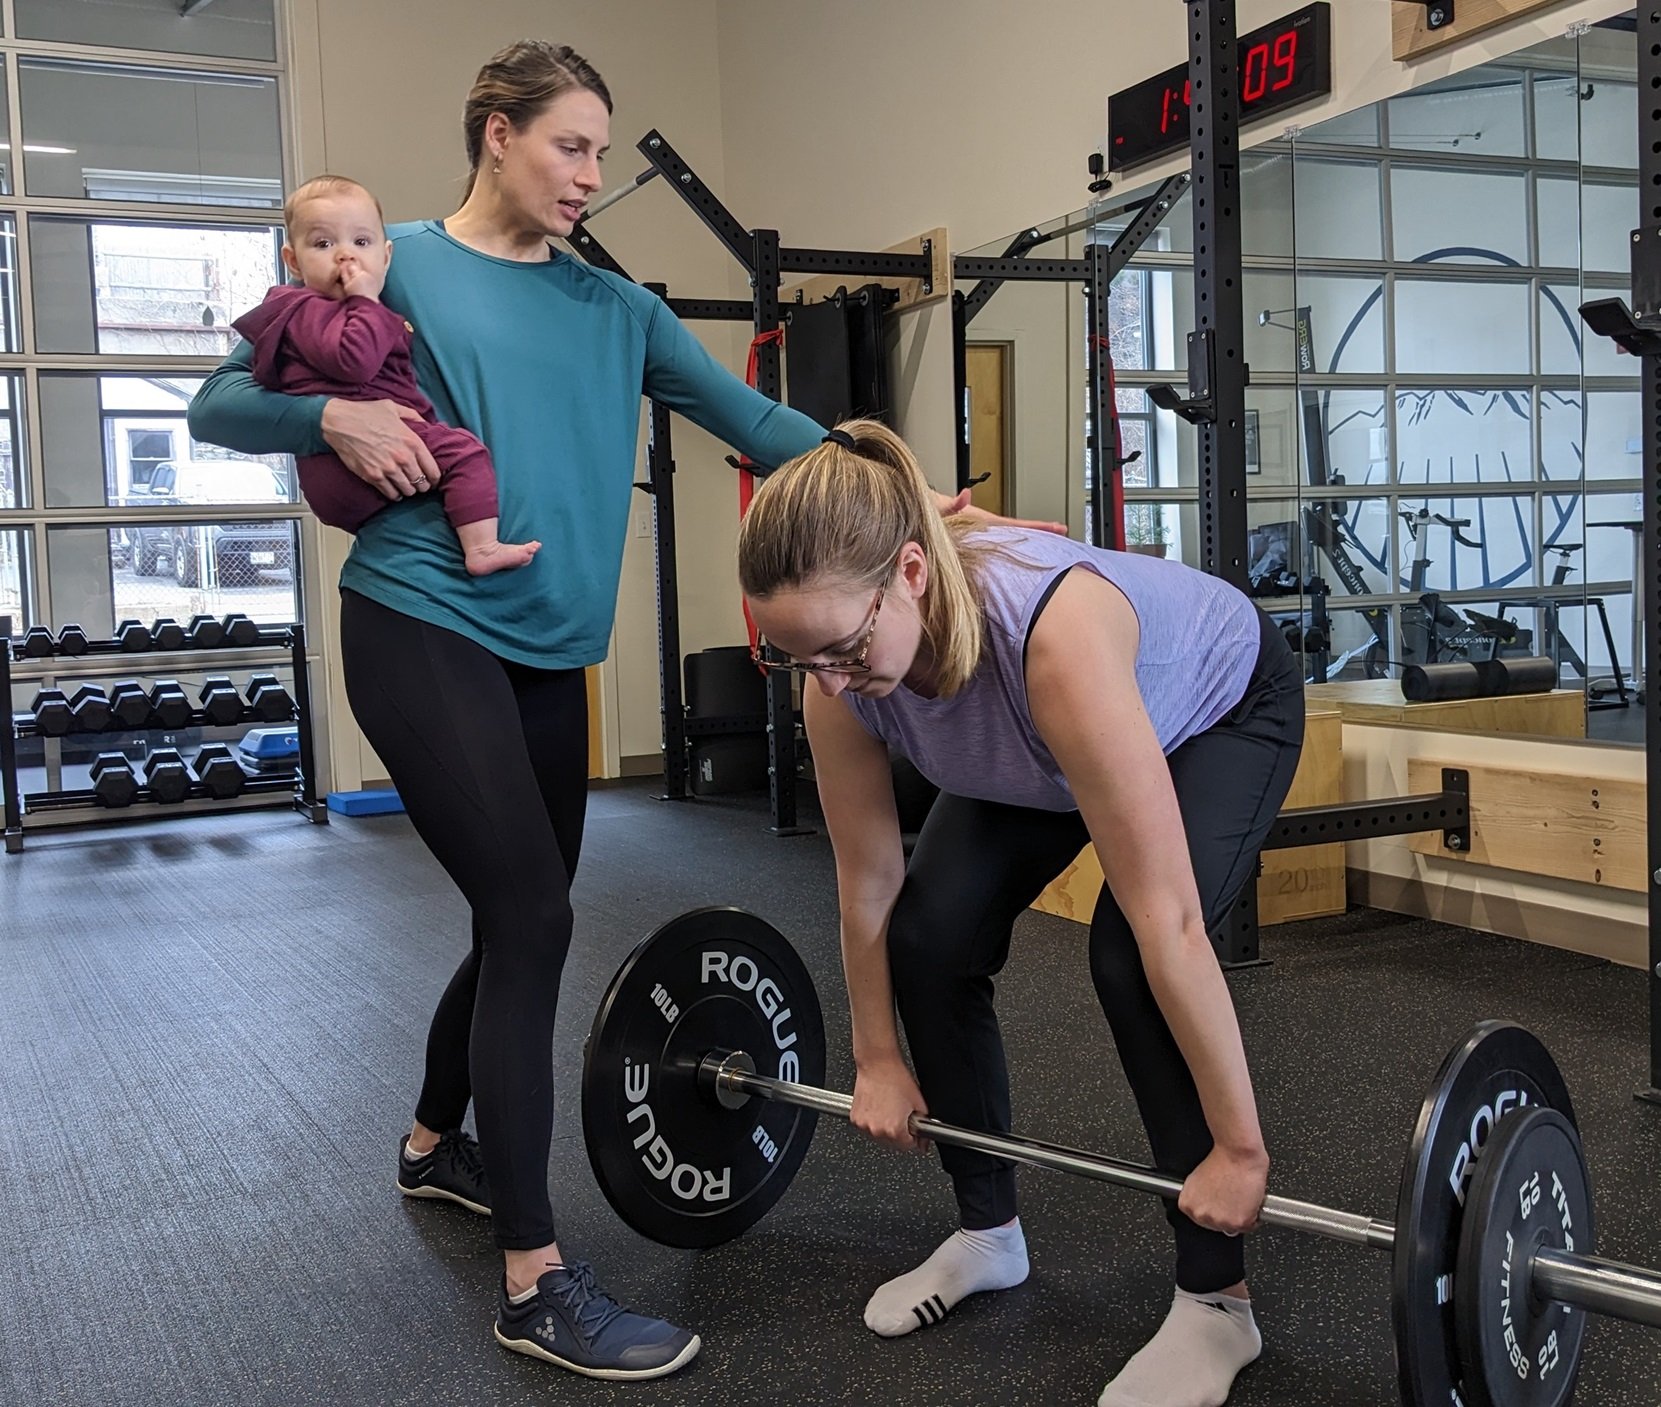 A Pelvic Floor Physical Therapist holding a mom's baby while instructing her on core engagement with deadlifting.